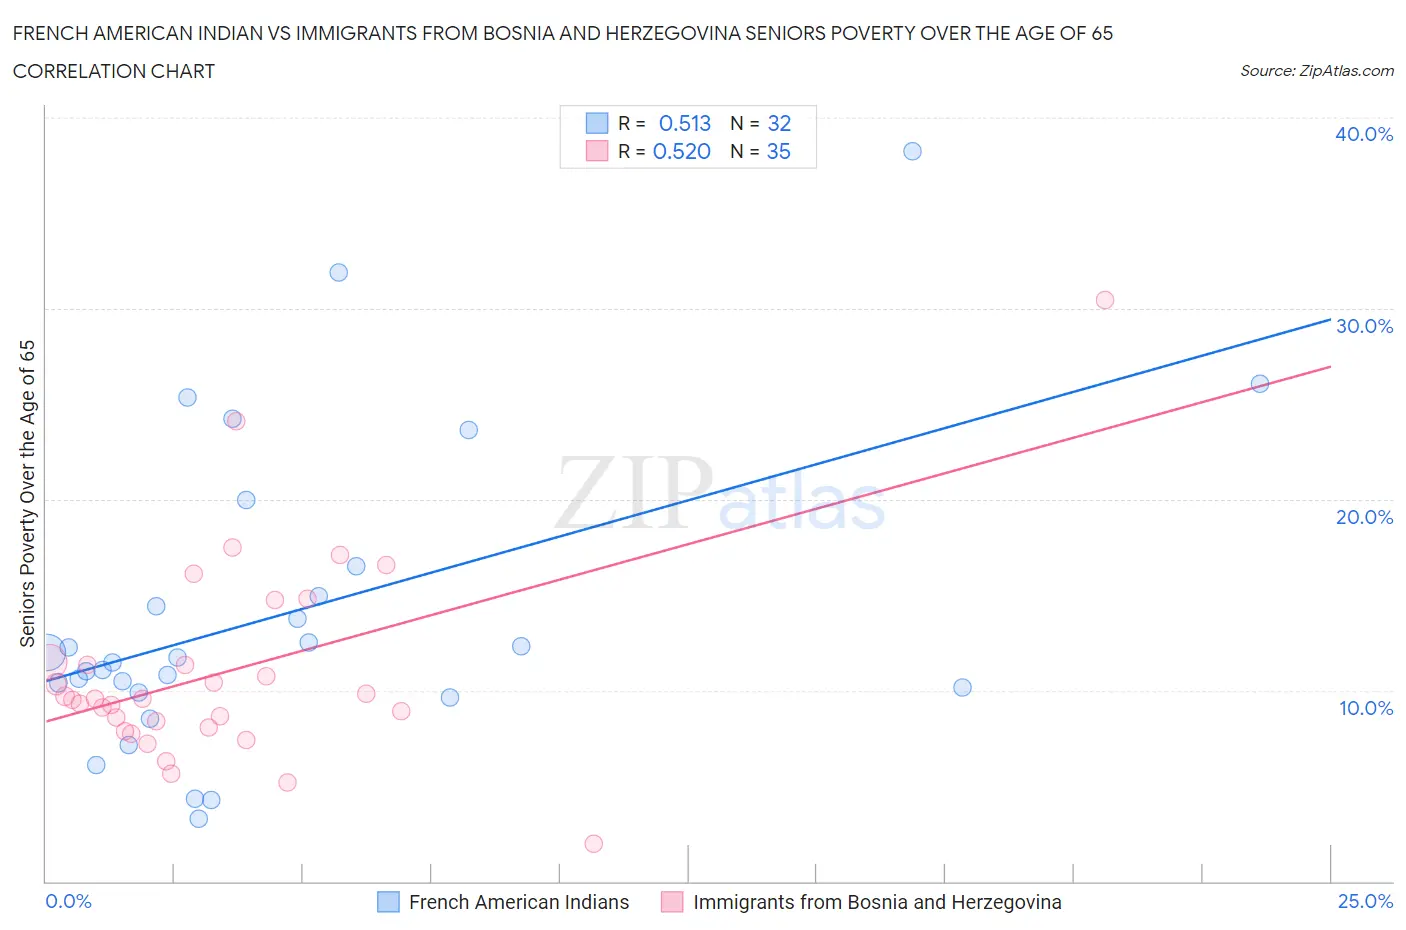 French American Indian vs Immigrants from Bosnia and Herzegovina Seniors Poverty Over the Age of 65